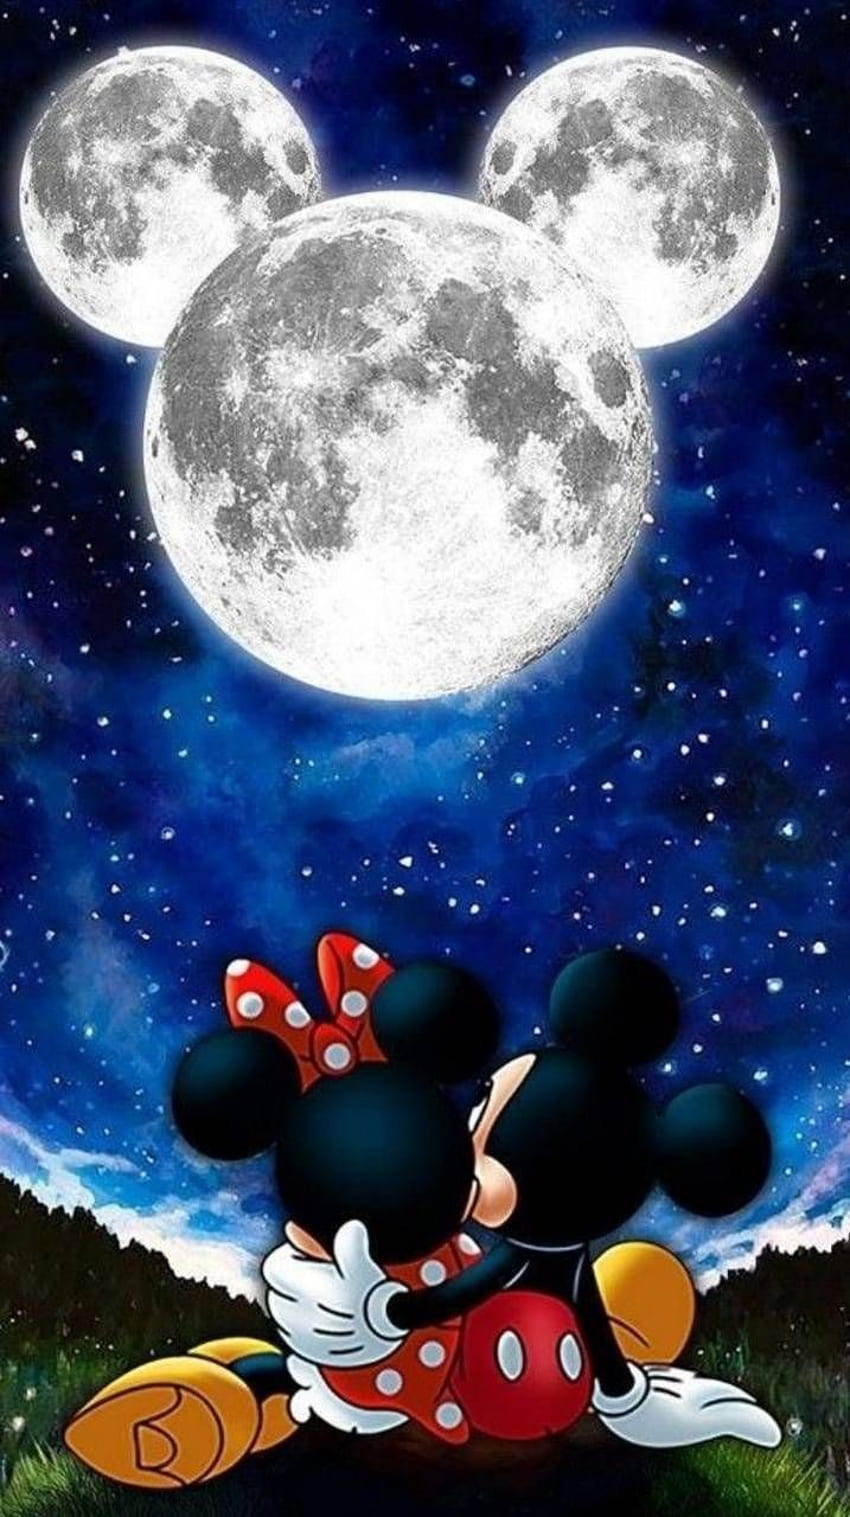 Mickey and minnie | Mickey mouse wallpaper iphone, Wallpaper iphone disney,  Disney phone wallpaper